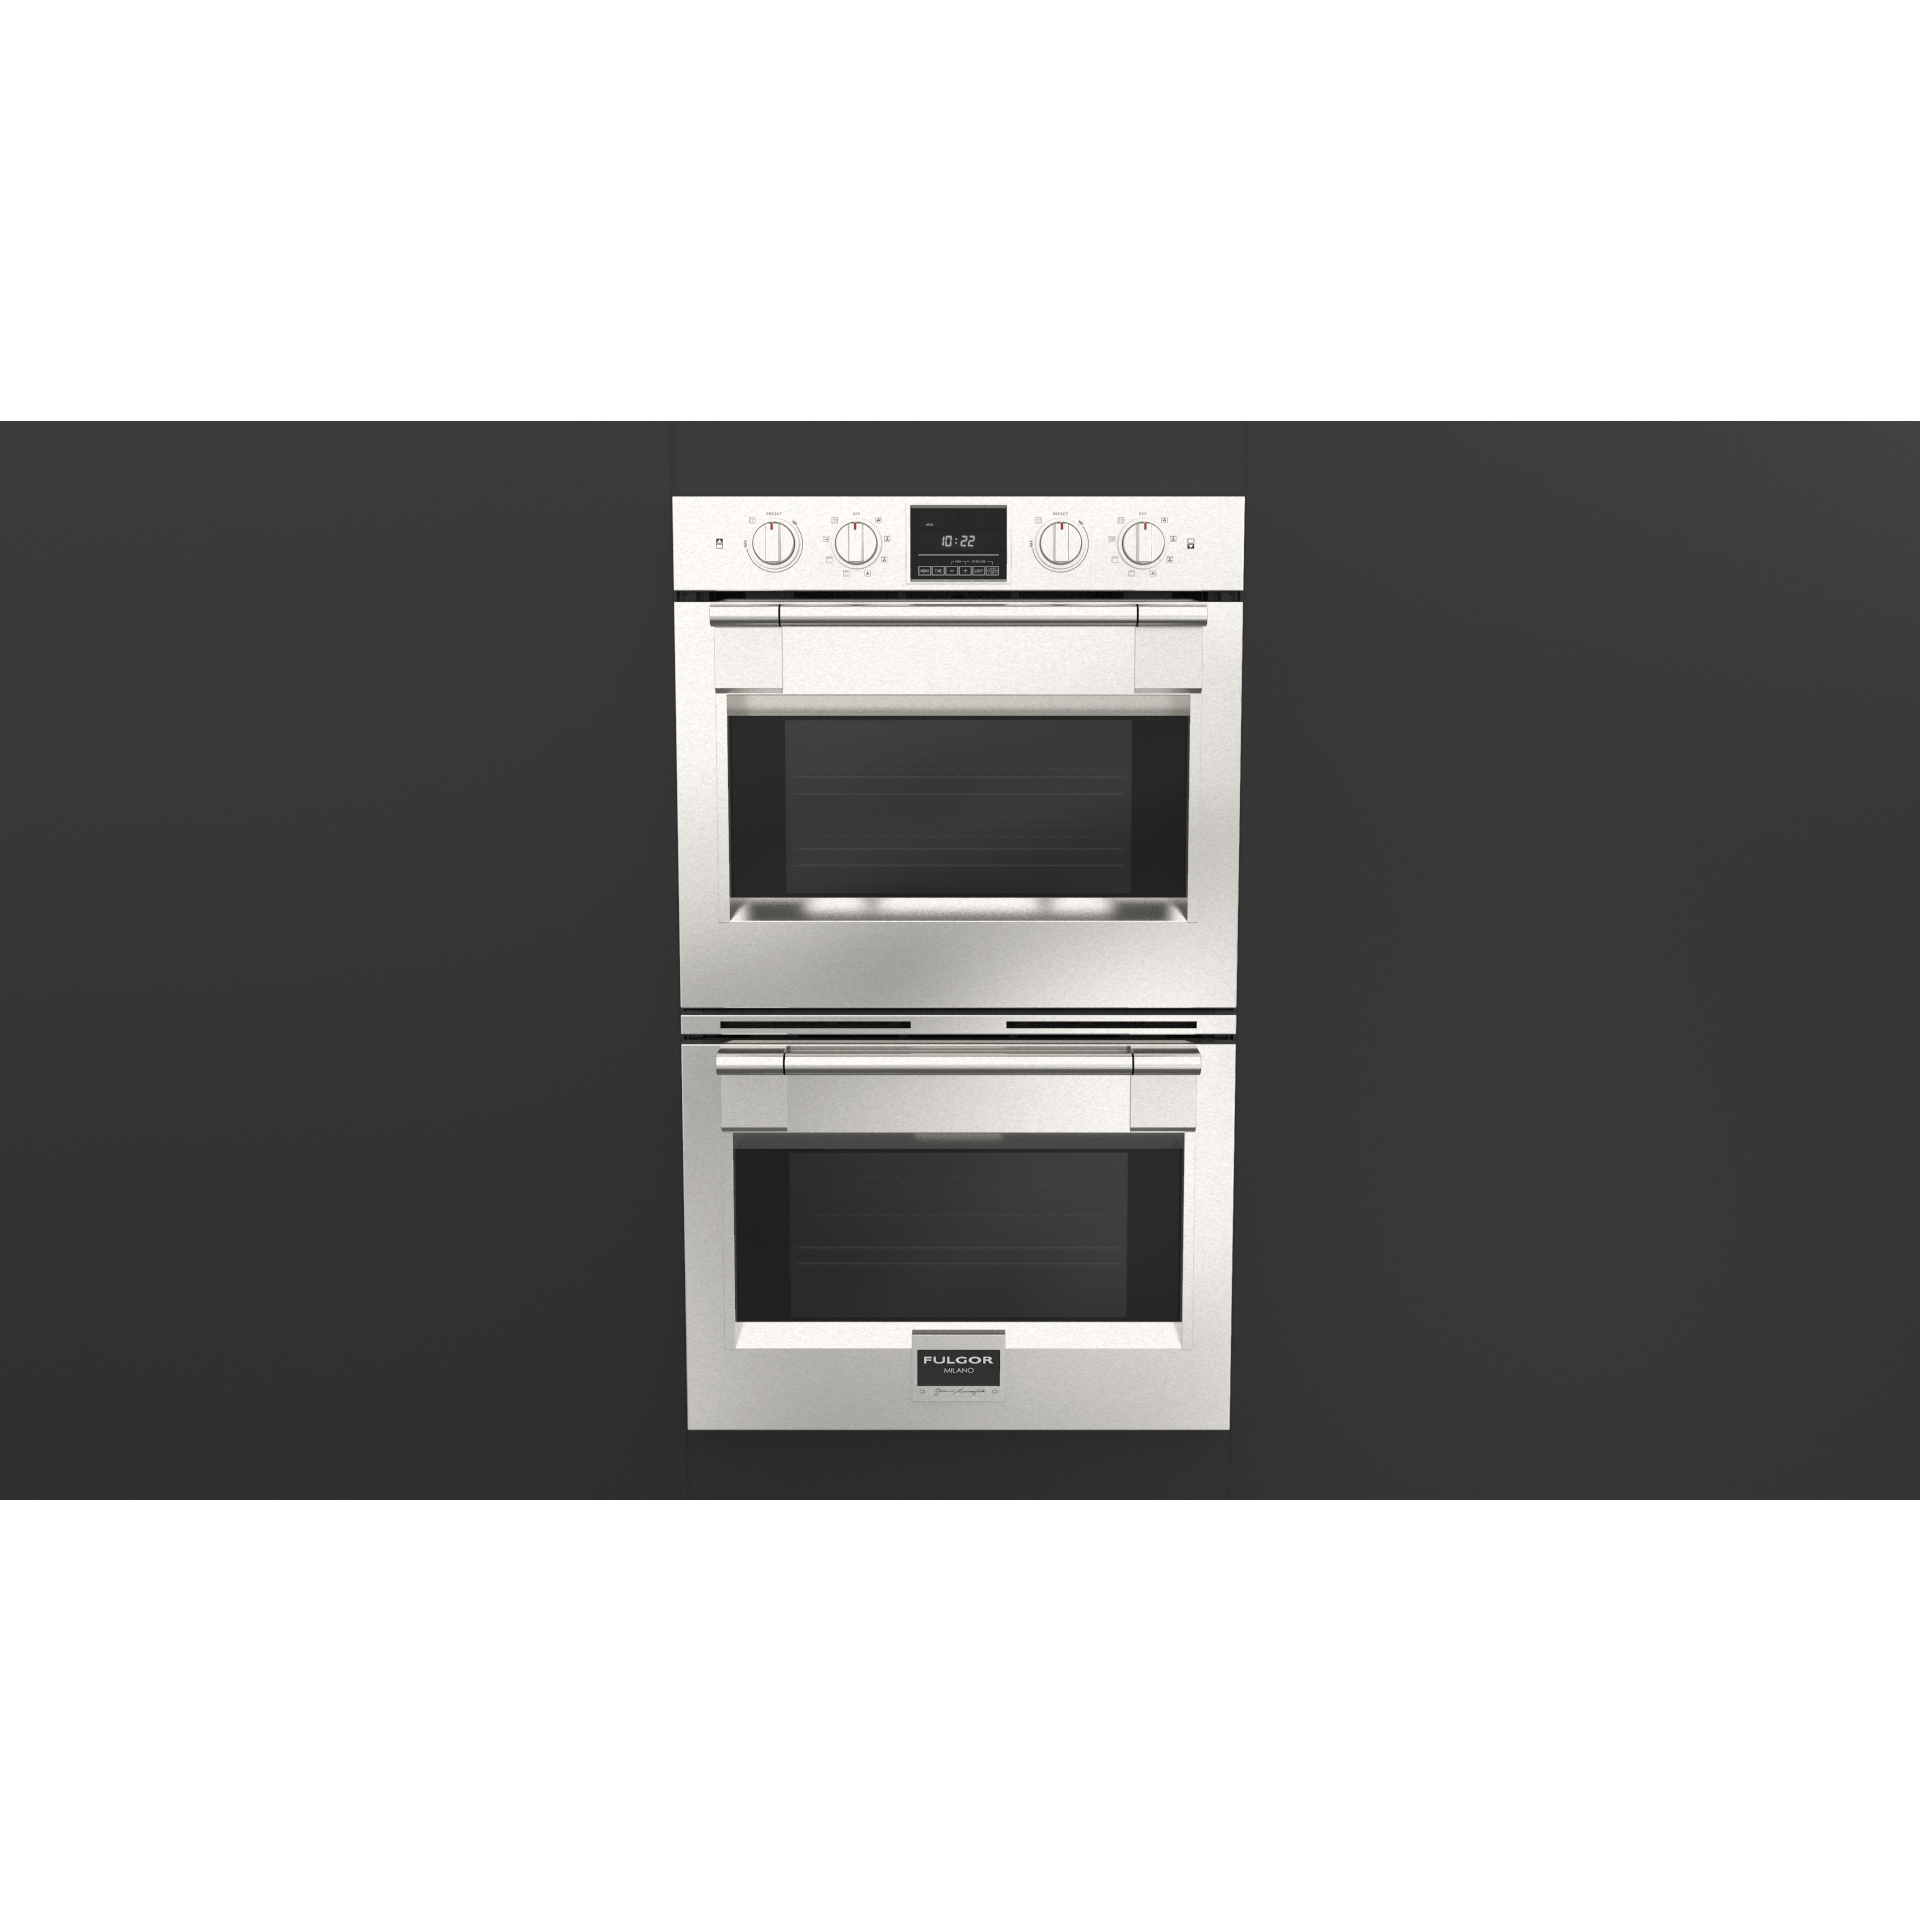 Fulgor Milano 30" Double Electric Wall Oven with 8.2 cu. ft. Capacity, Stainless Steel - F6PDP30S1 Wall Oven F6PDP30S1 Luxury Appliances Direct